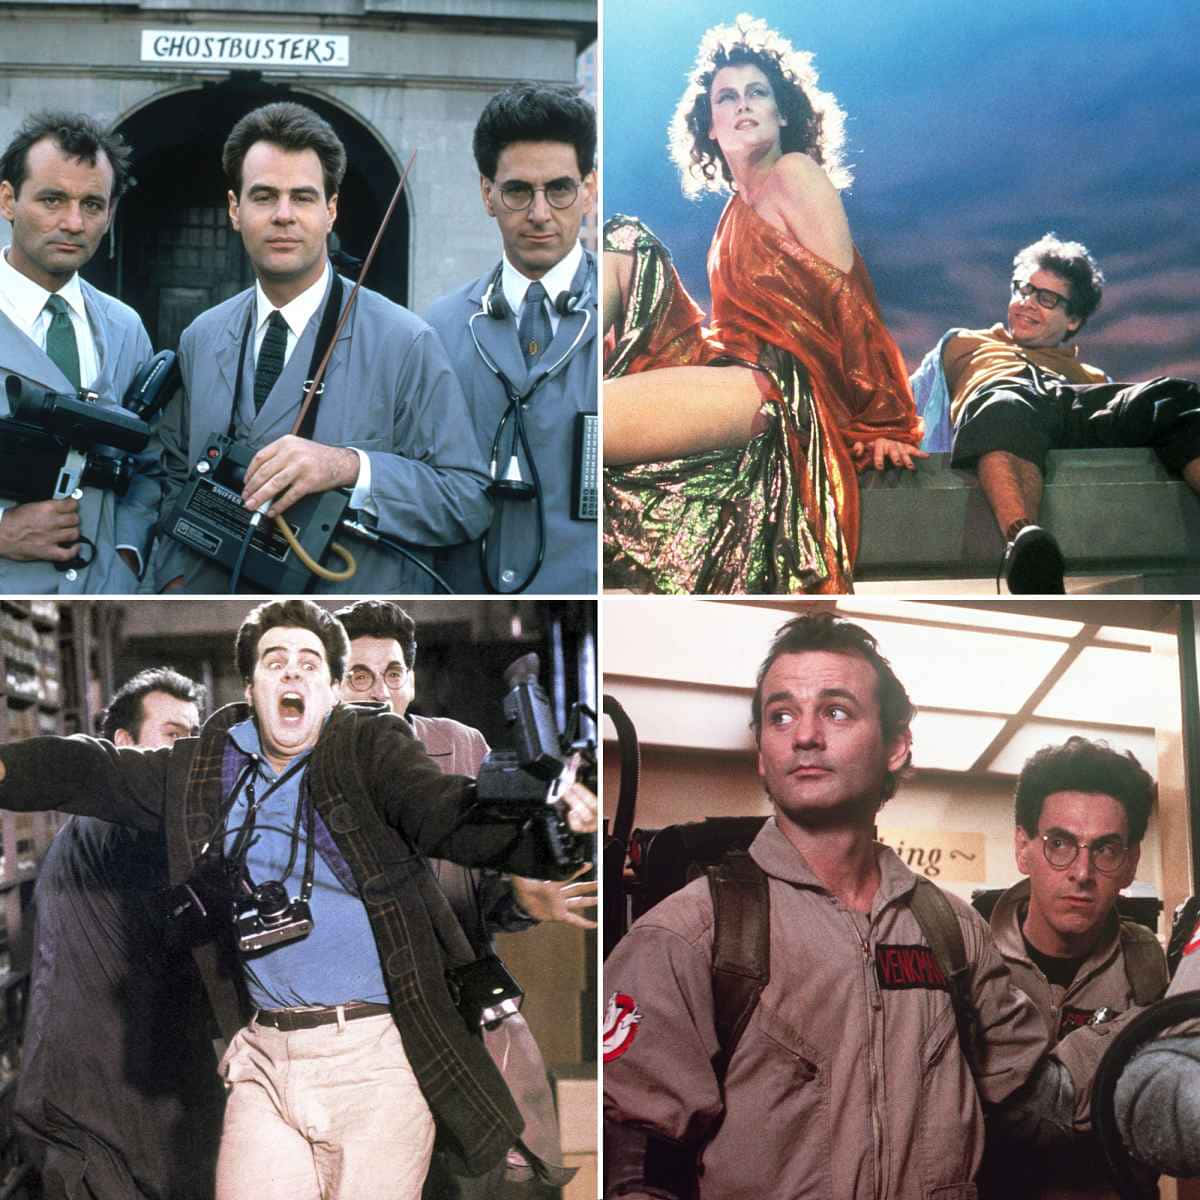 Classic Ghostbusters team ready for action